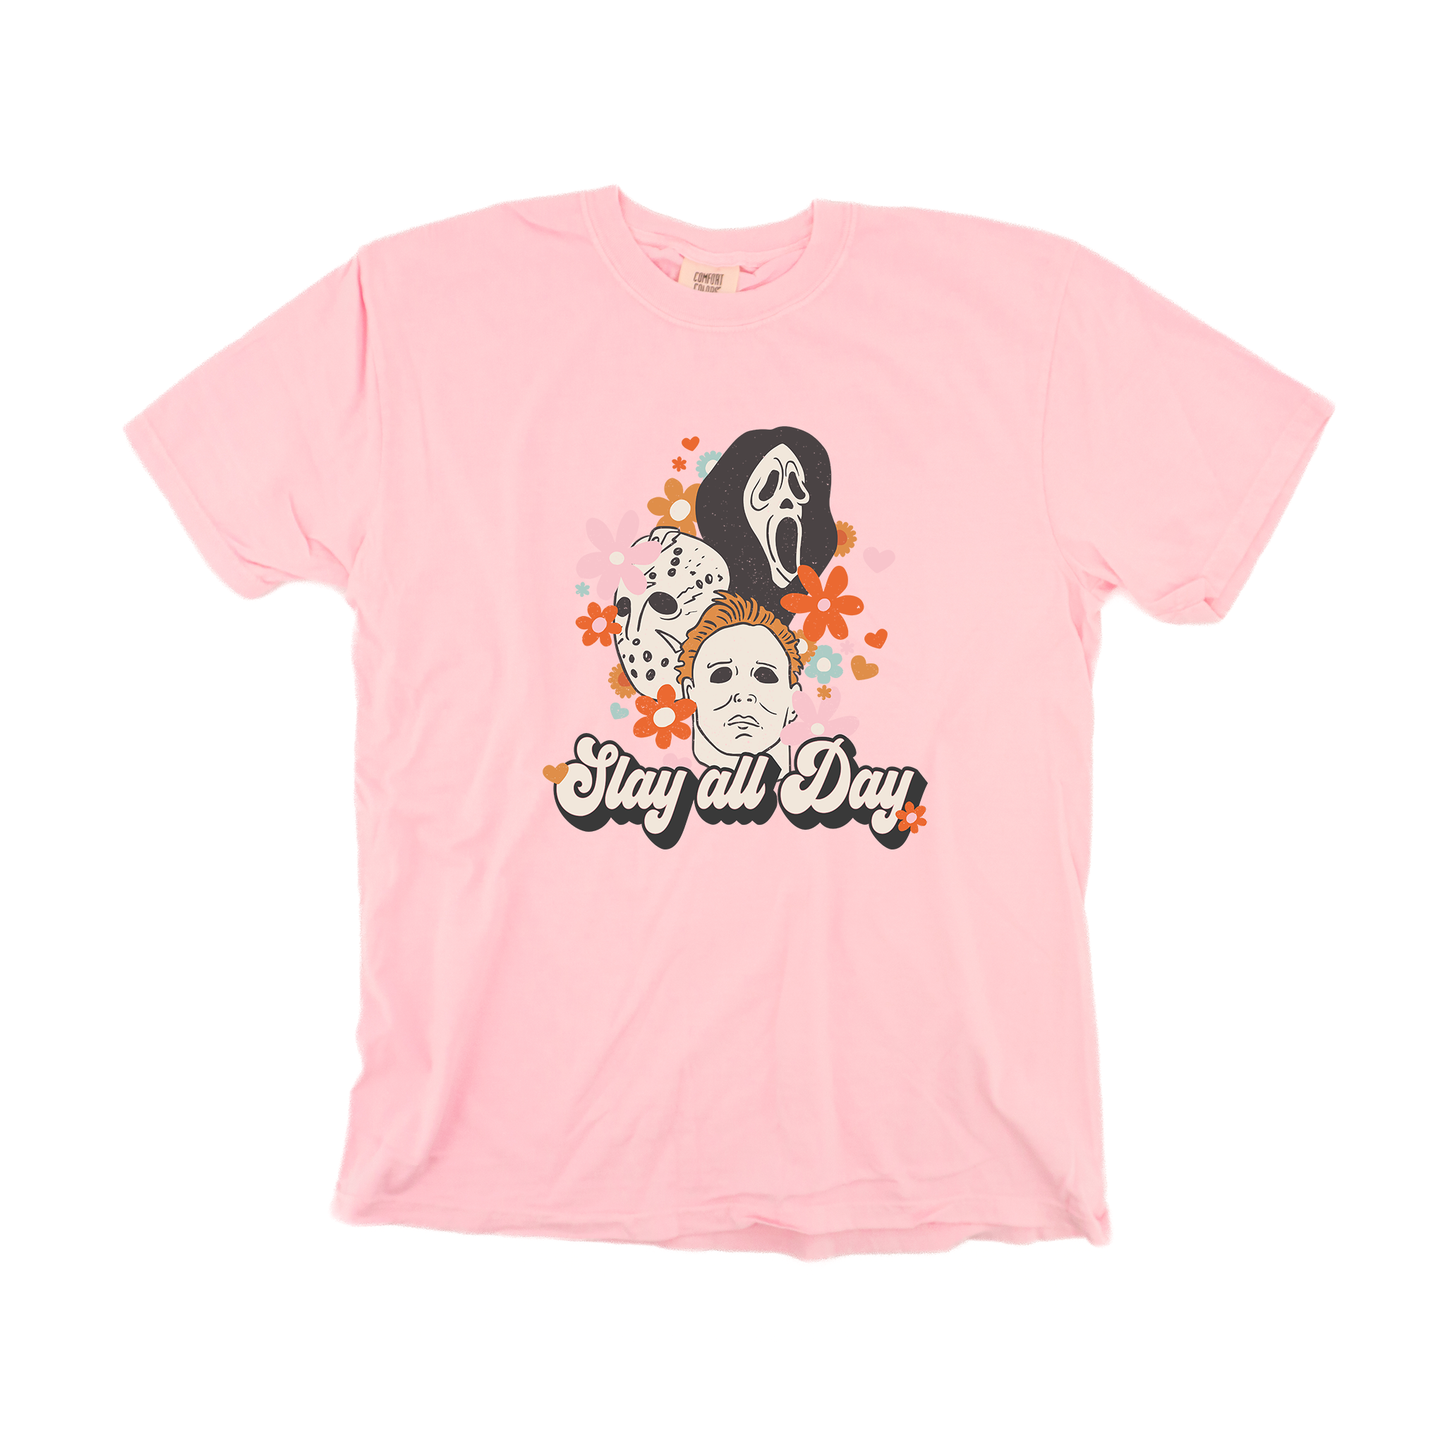 Slay All Day - Tee (Pale Pink)